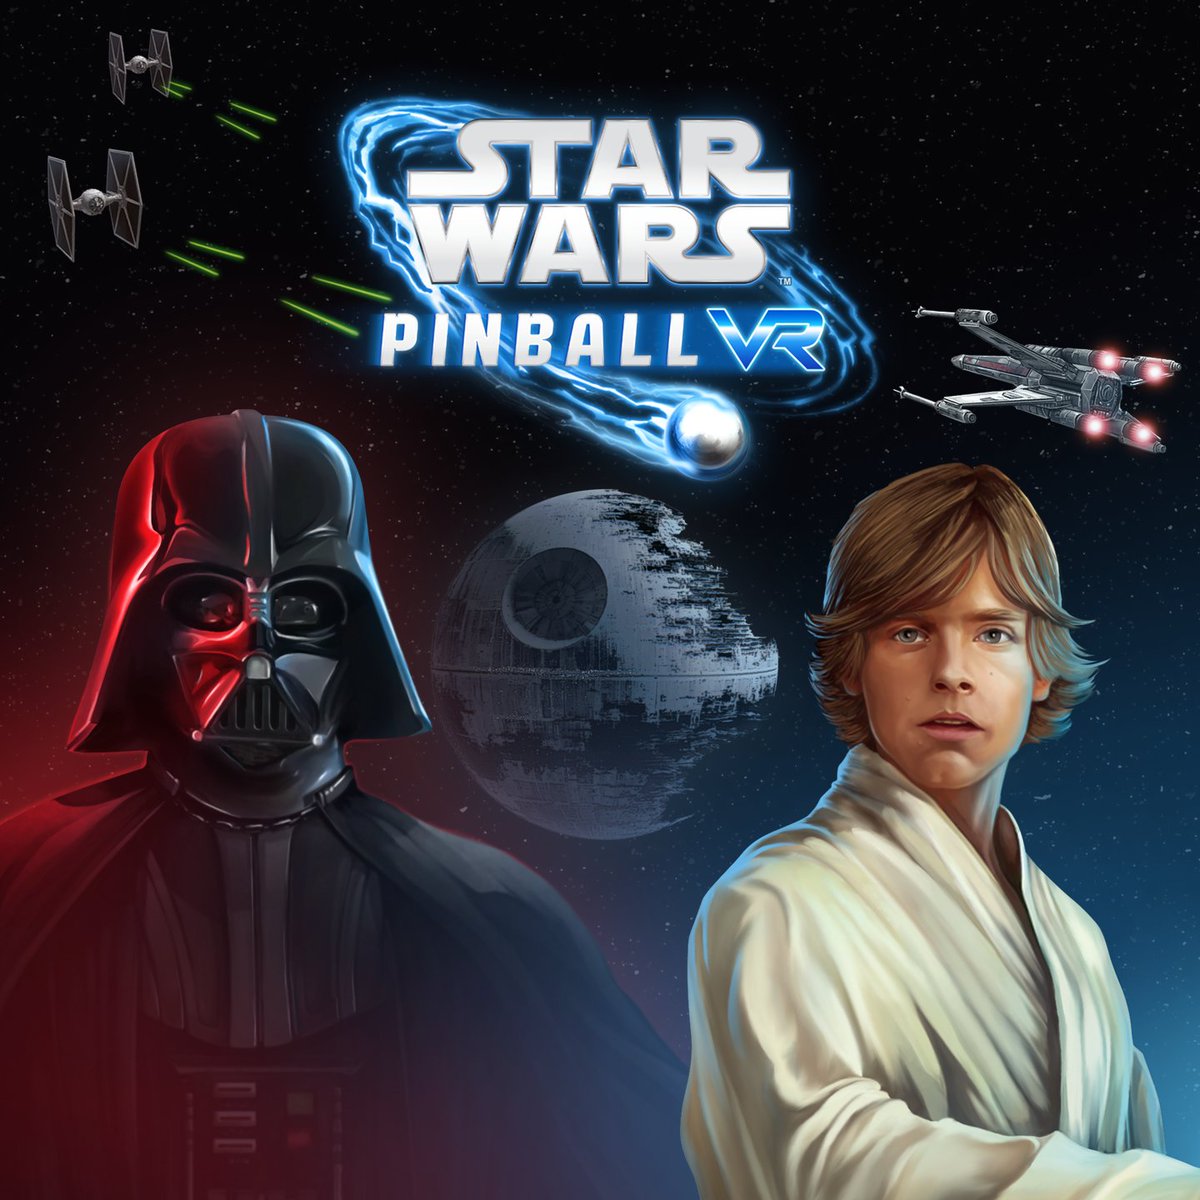 Experience Star Wars Pinball in Virtual Reality, featuring 10 classic Star Wars Pinball tables, a customizable Fan Cave, and immersive mini-games, all for up to 66% off! metaque.st/3Ufd7hT